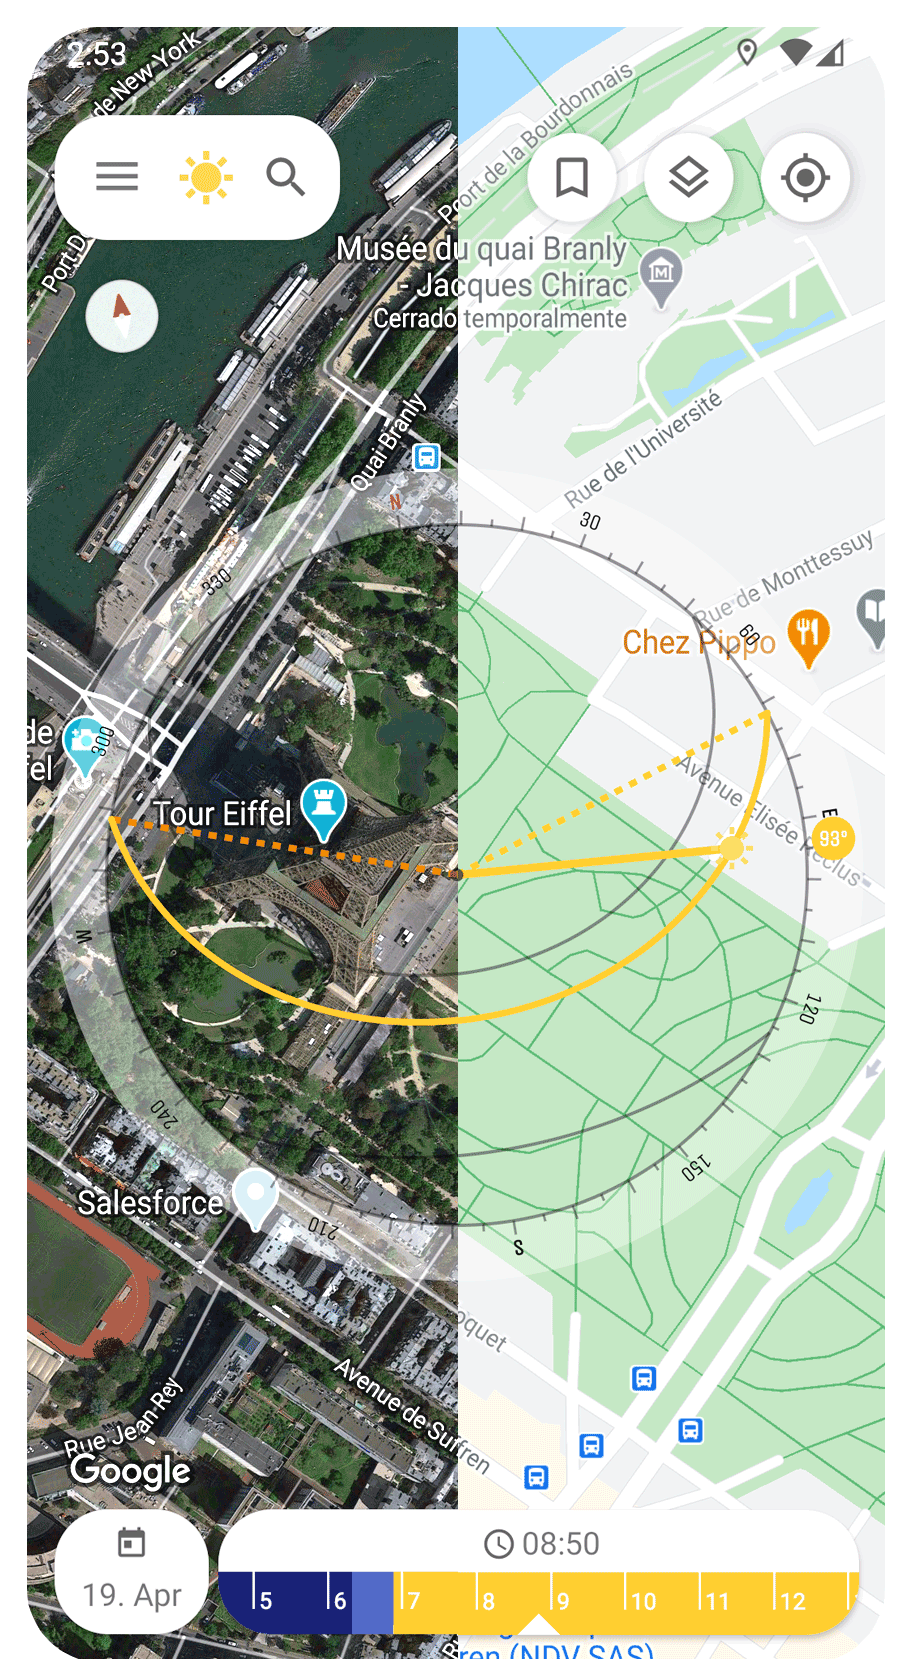 Sunnytrack App Screenshot showing Map View for Eiffel Tower with different map styles